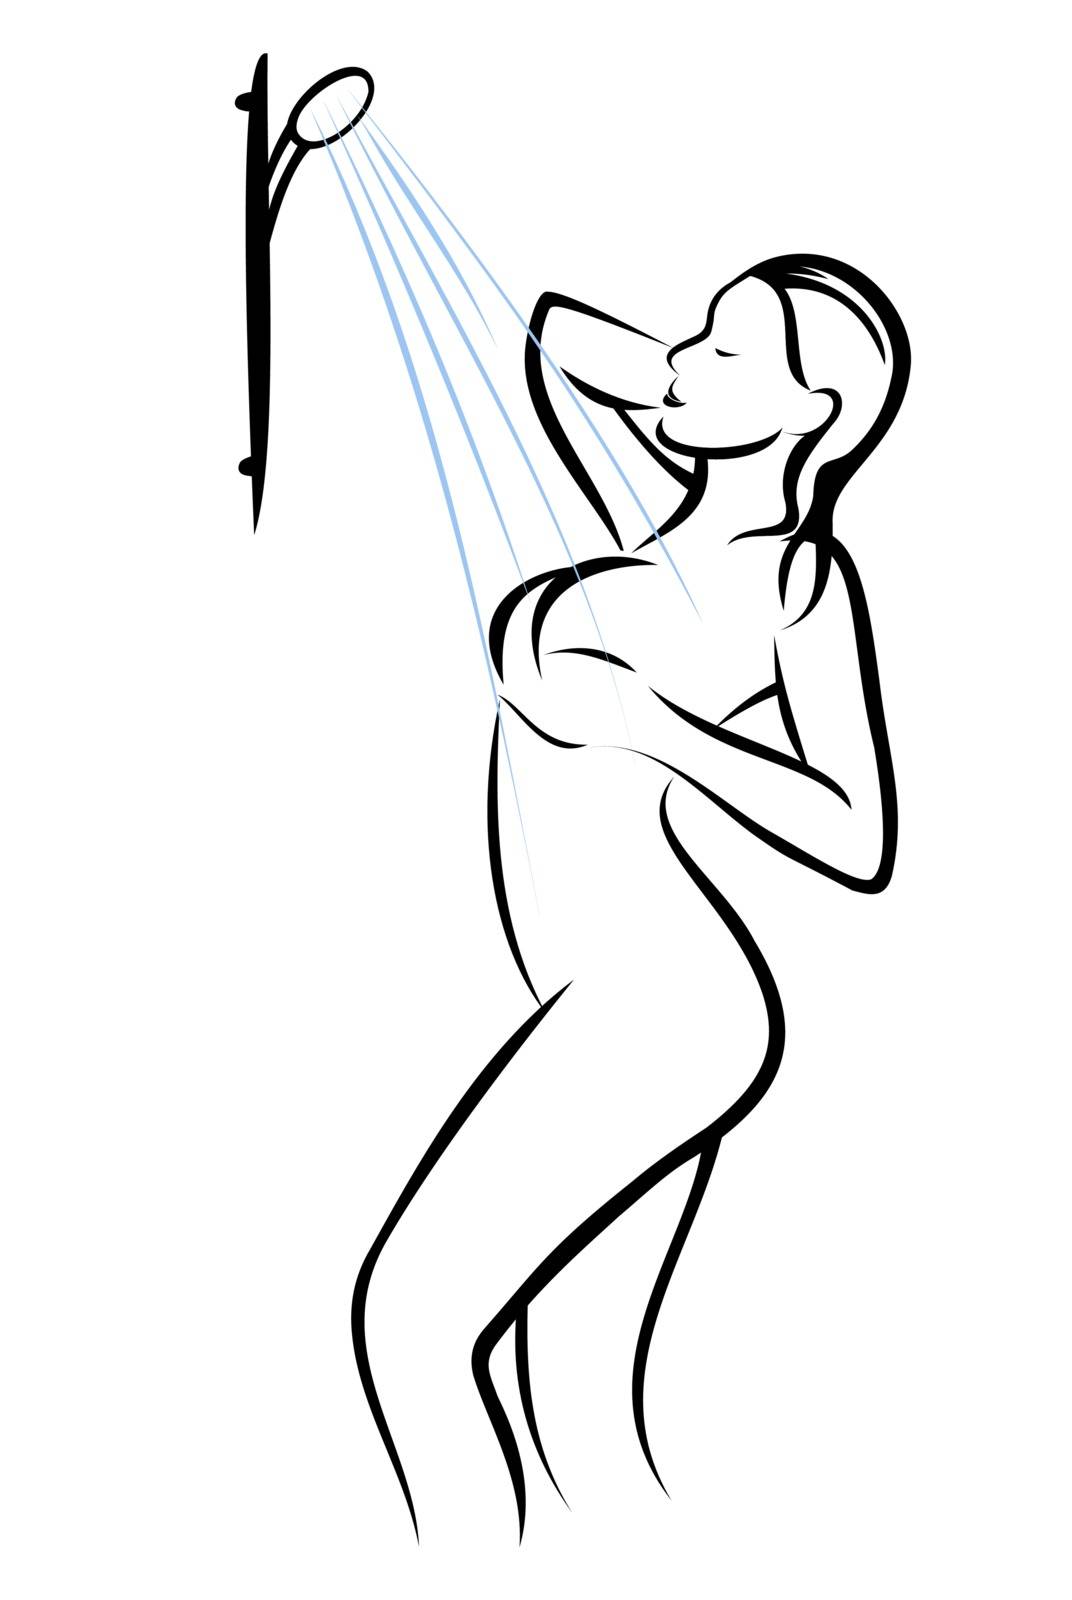 Woman in Shower by fxmdk